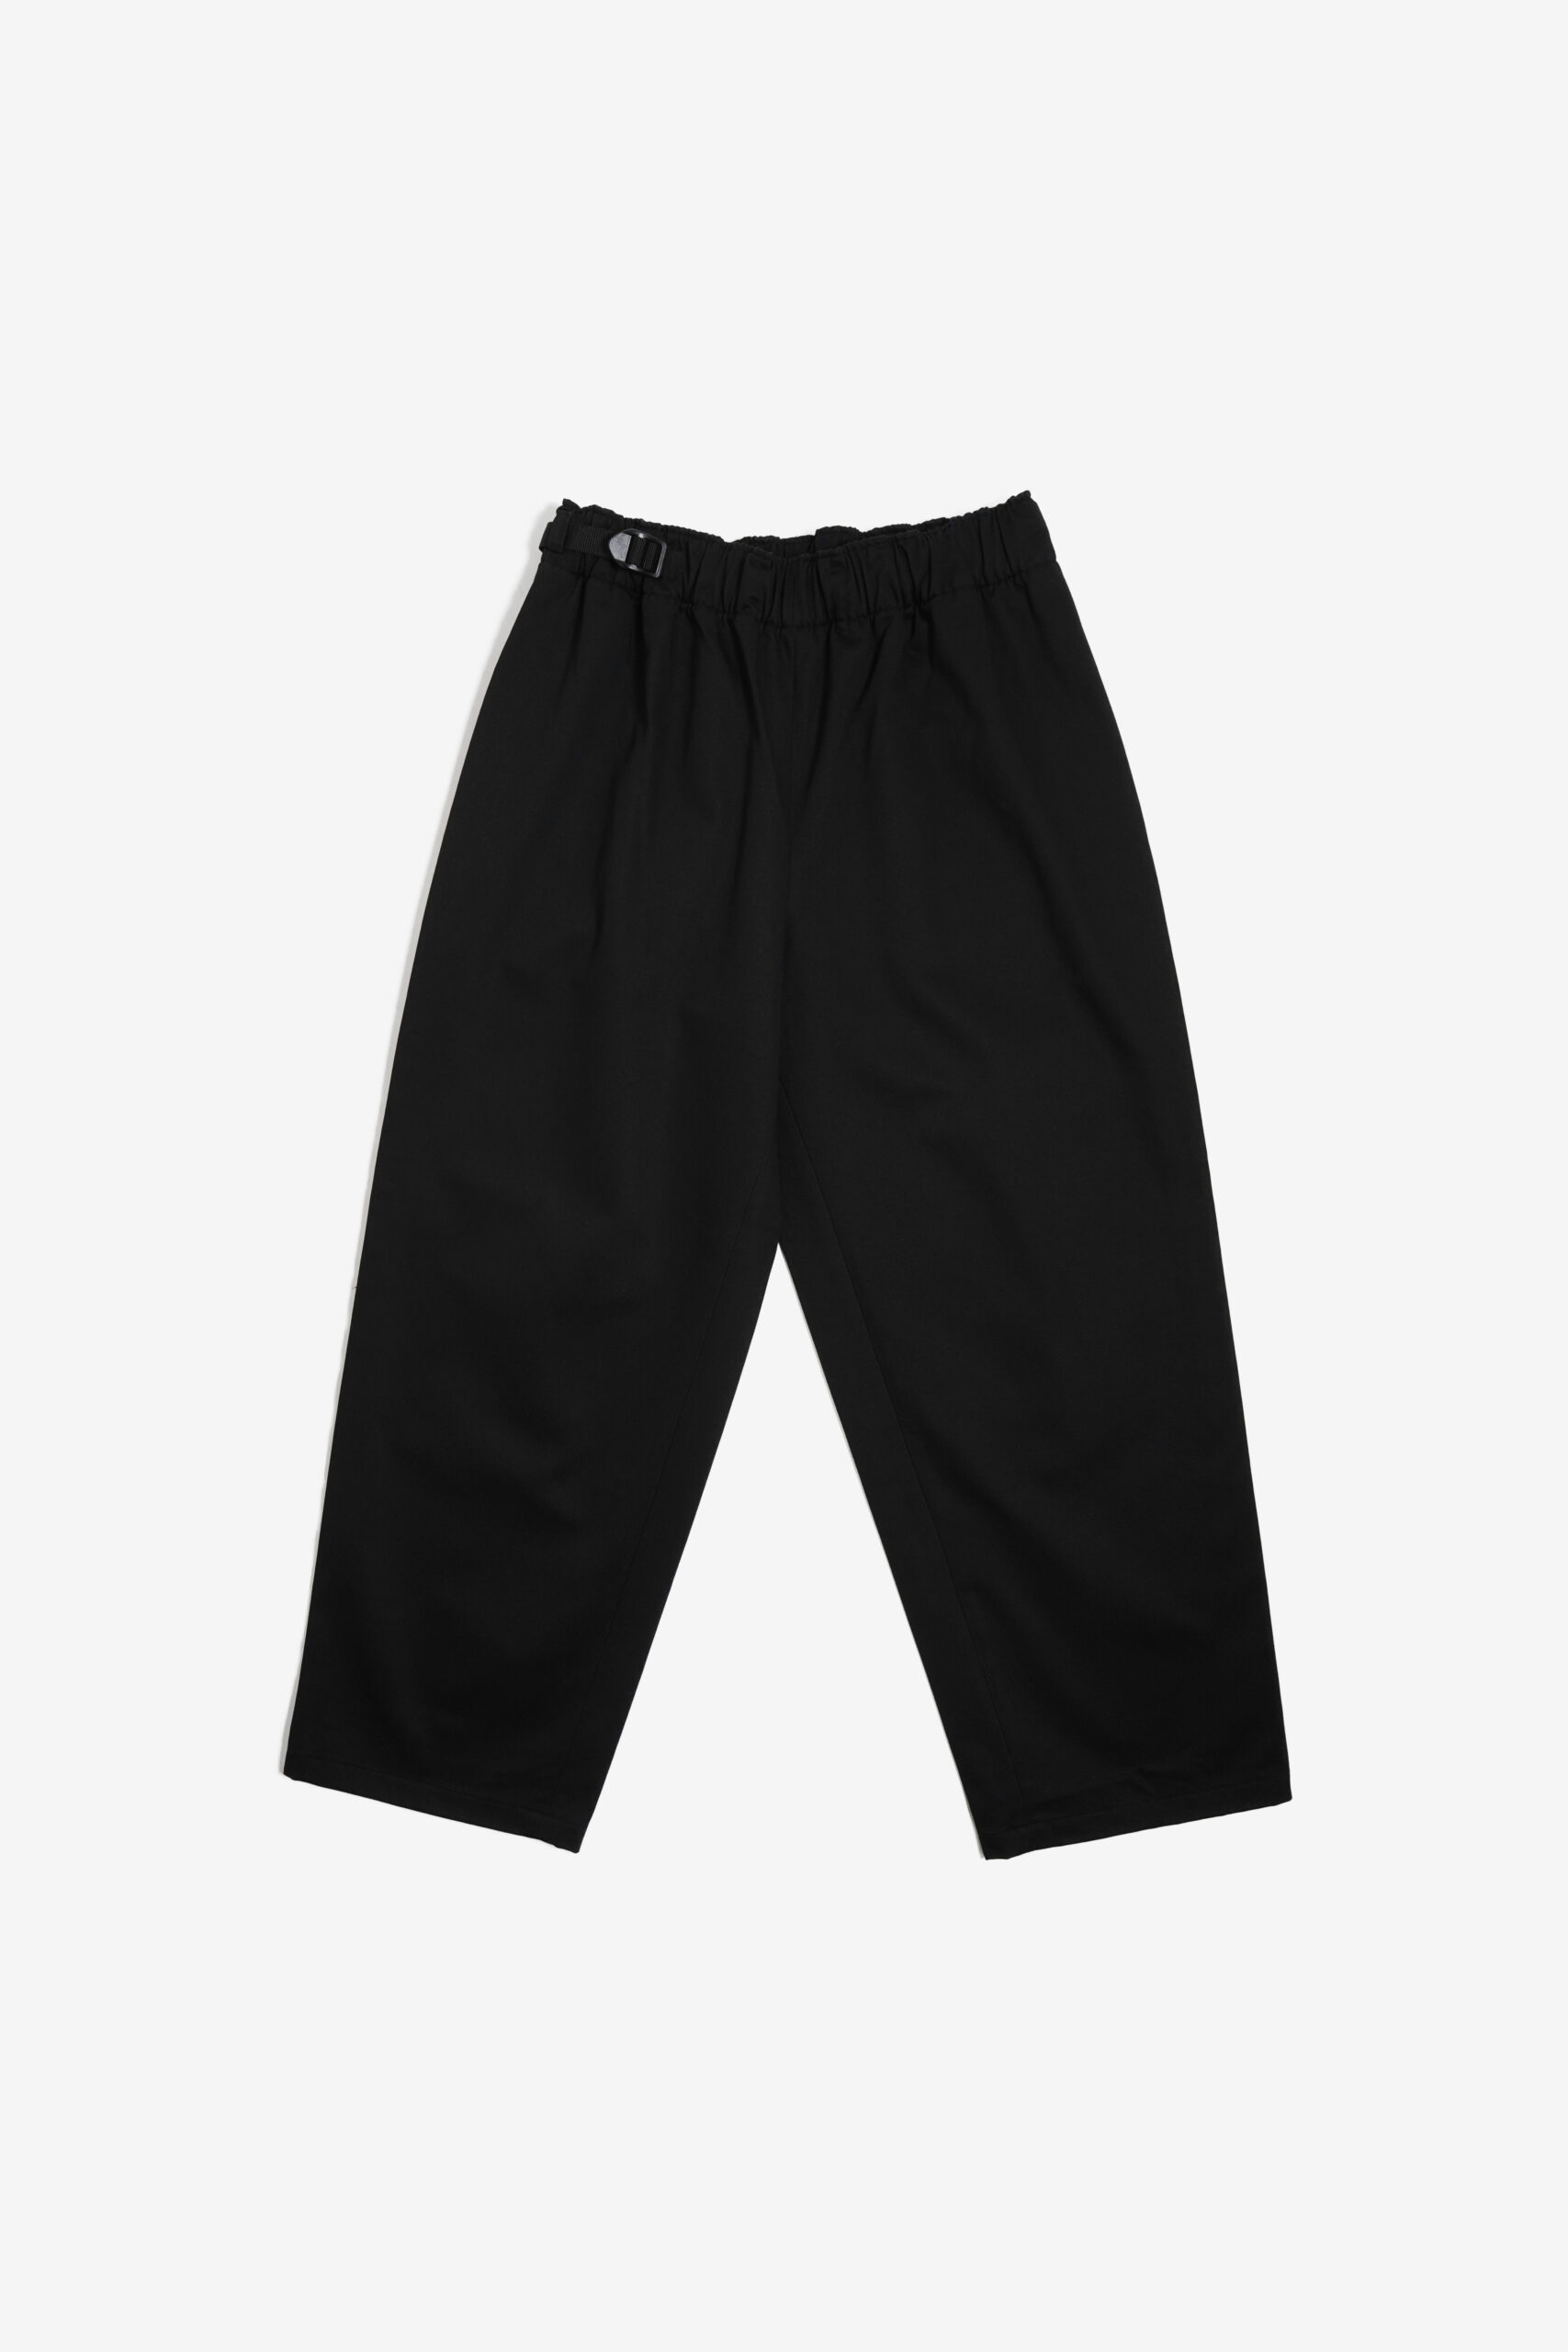 BELTED TROUSERS TYPE 3 - COTTON